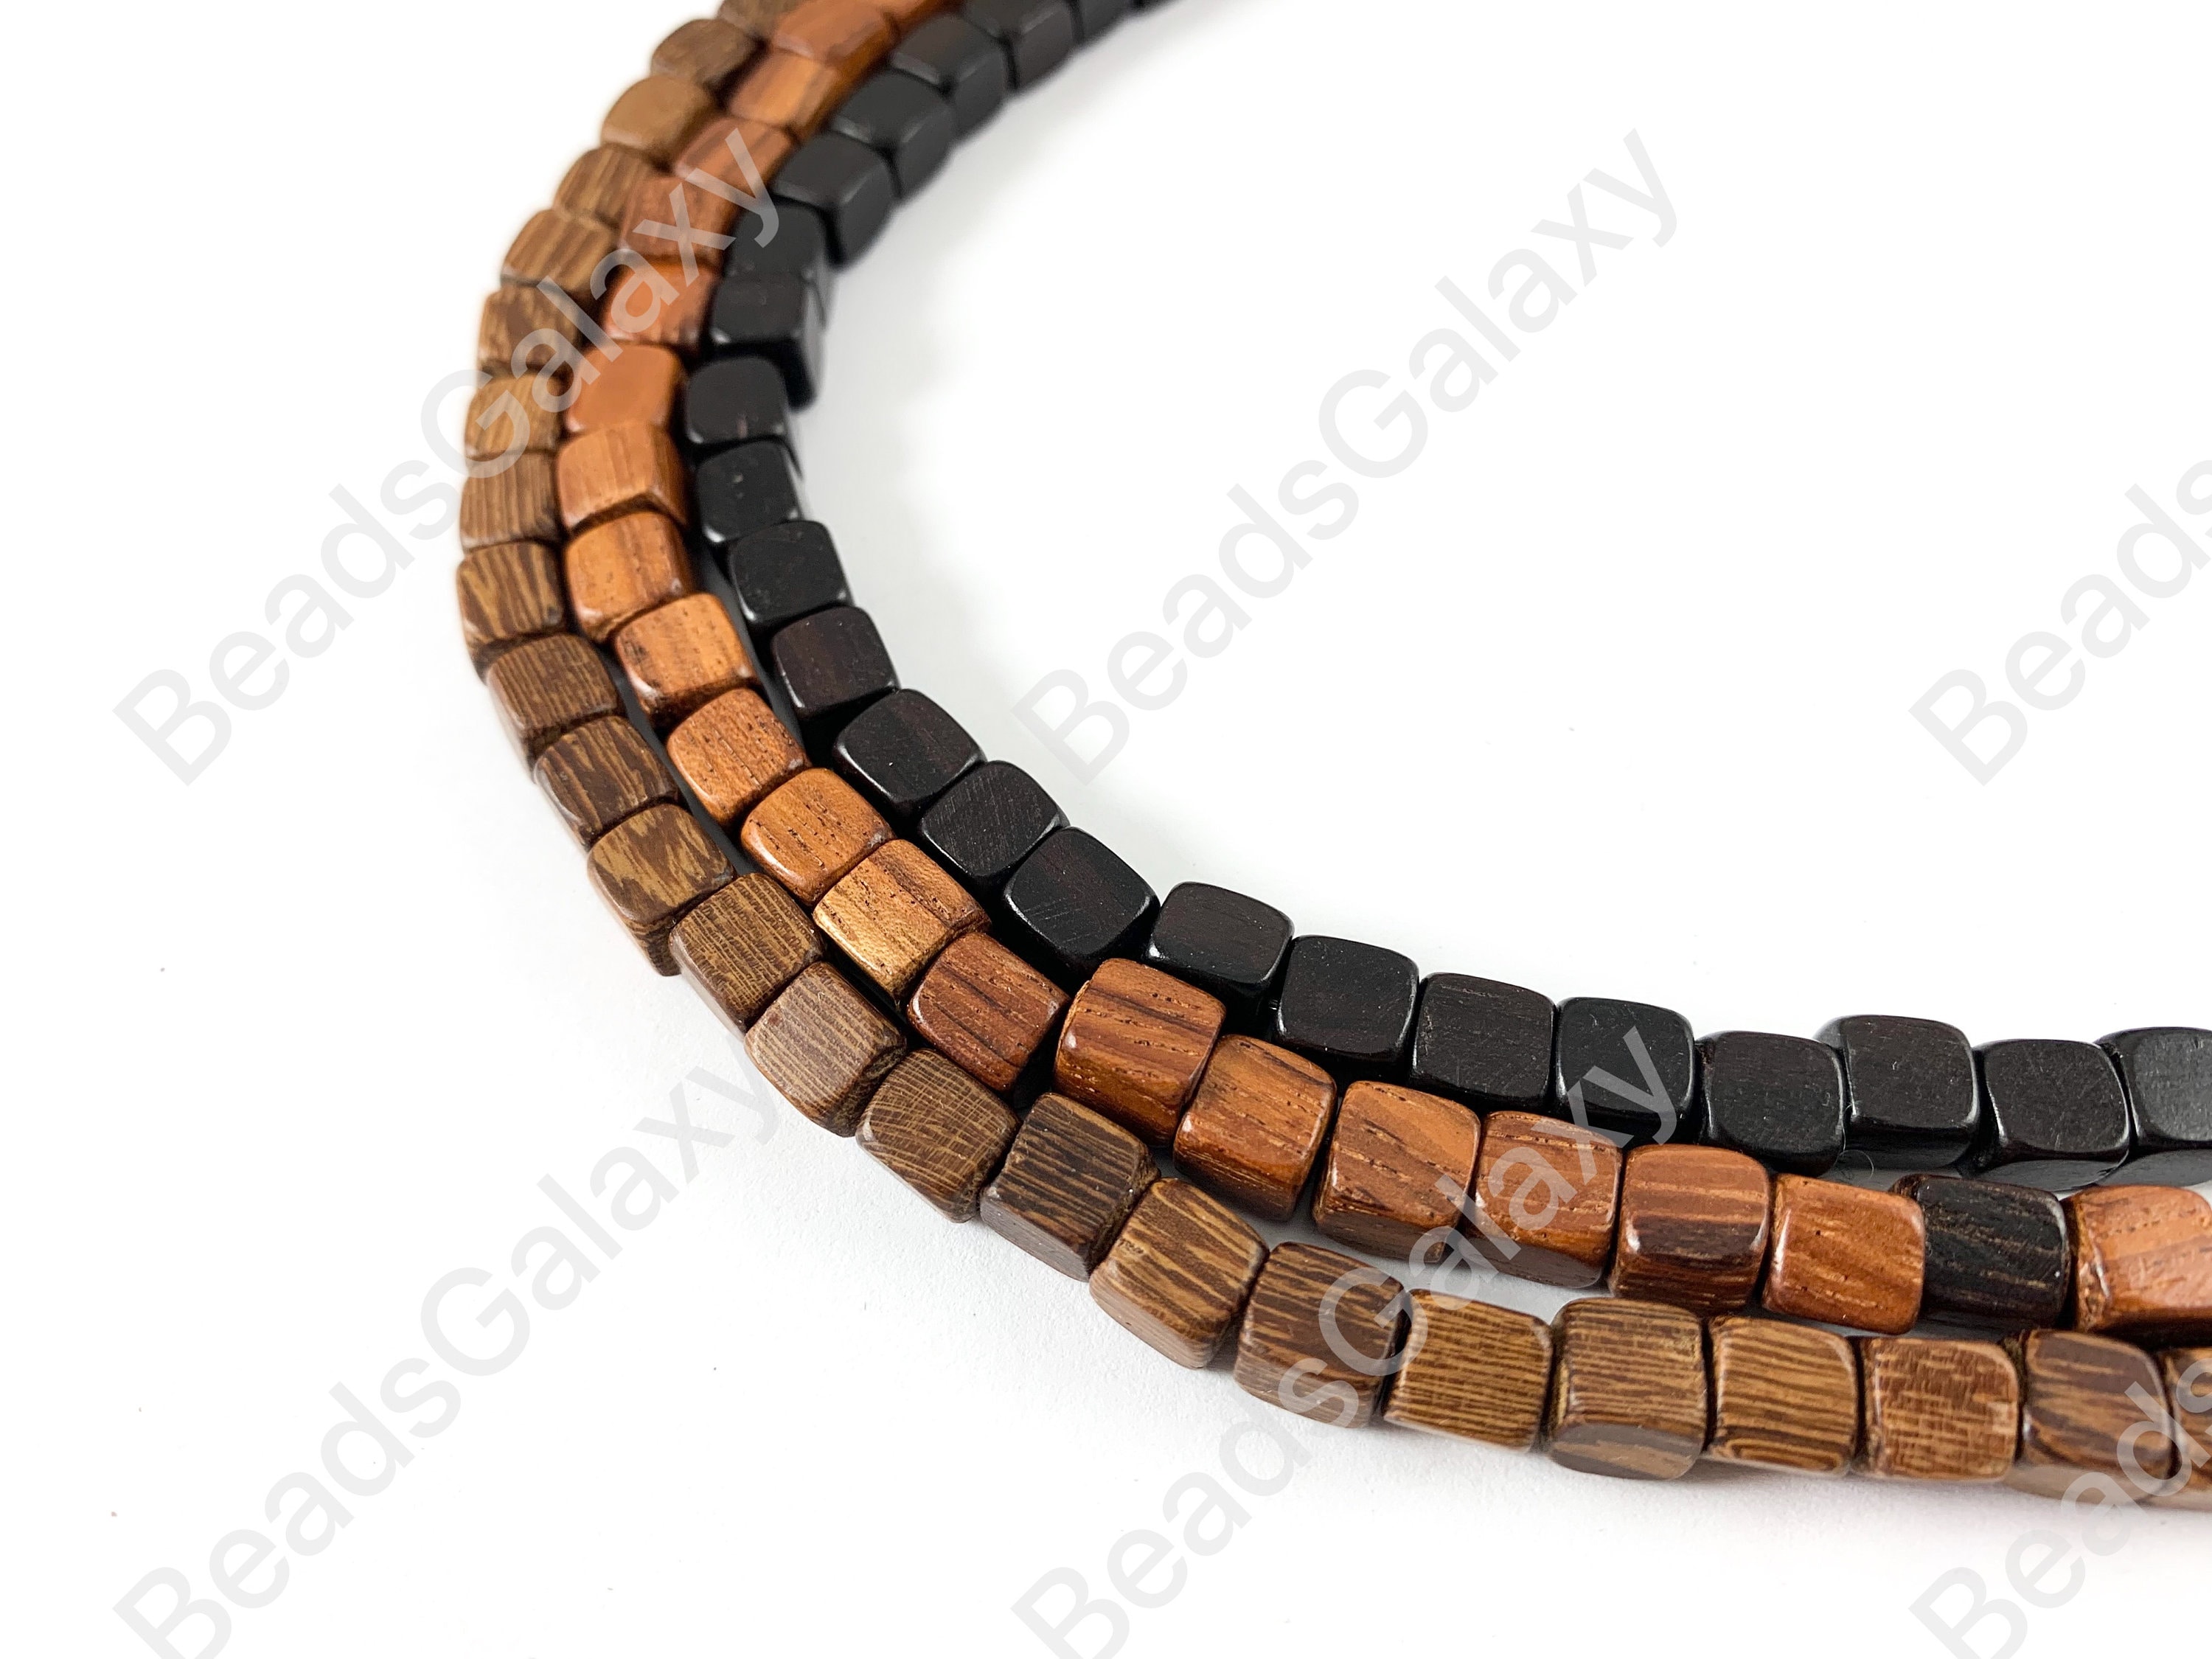 30pcs Alphabet Wooden Beads, Square Dyed Wood Beads With 26 Letters For  Beading Bracelet Necklace Jewelry Crafts Making, Christmas Decoration